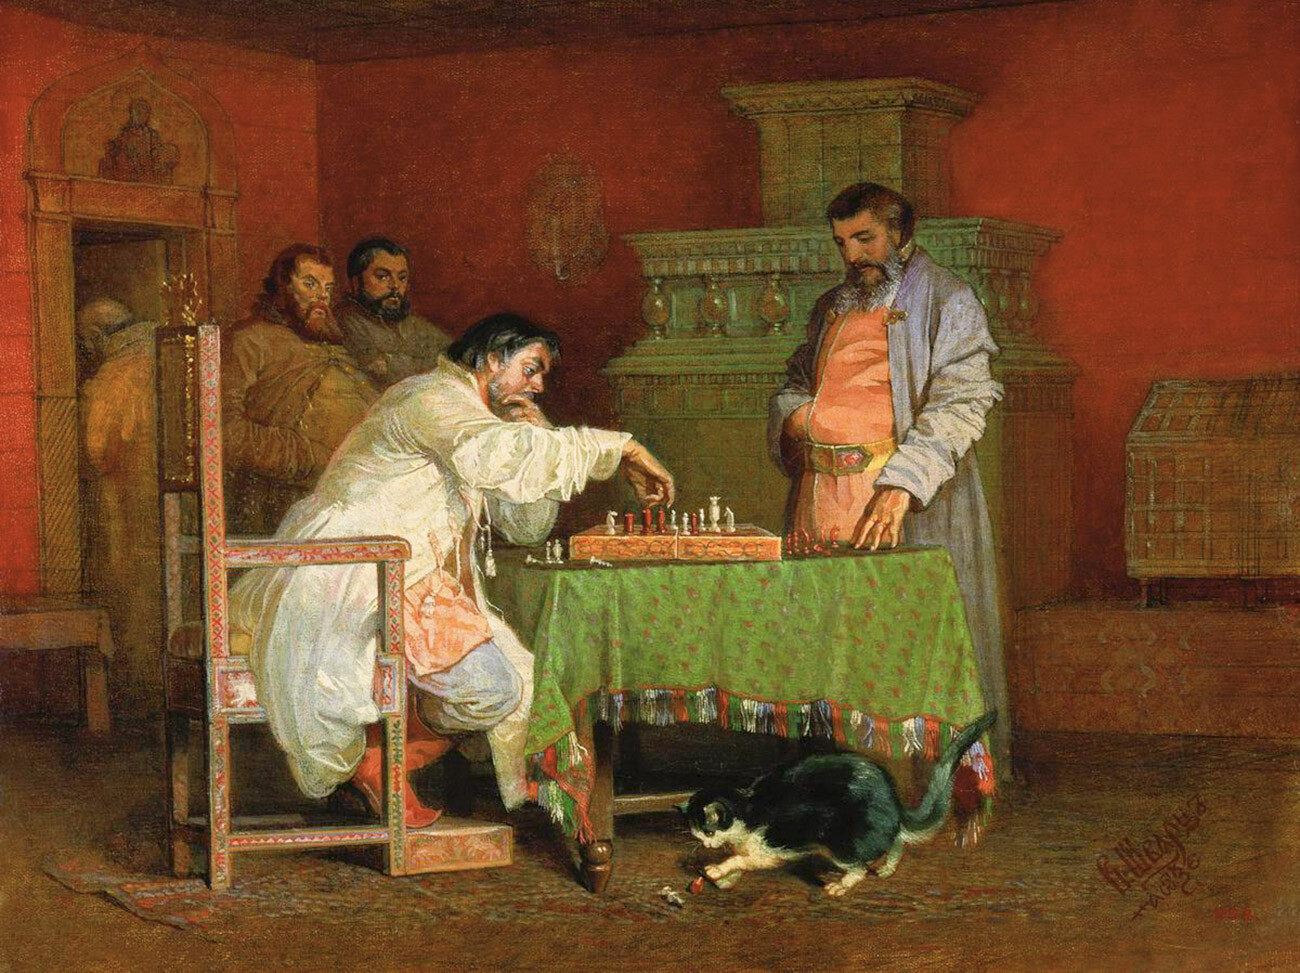 Vyacheslav Schwarz. Scene From the Life of Russian Tsars (a.k.a. Tsar Alexis I playing chess)